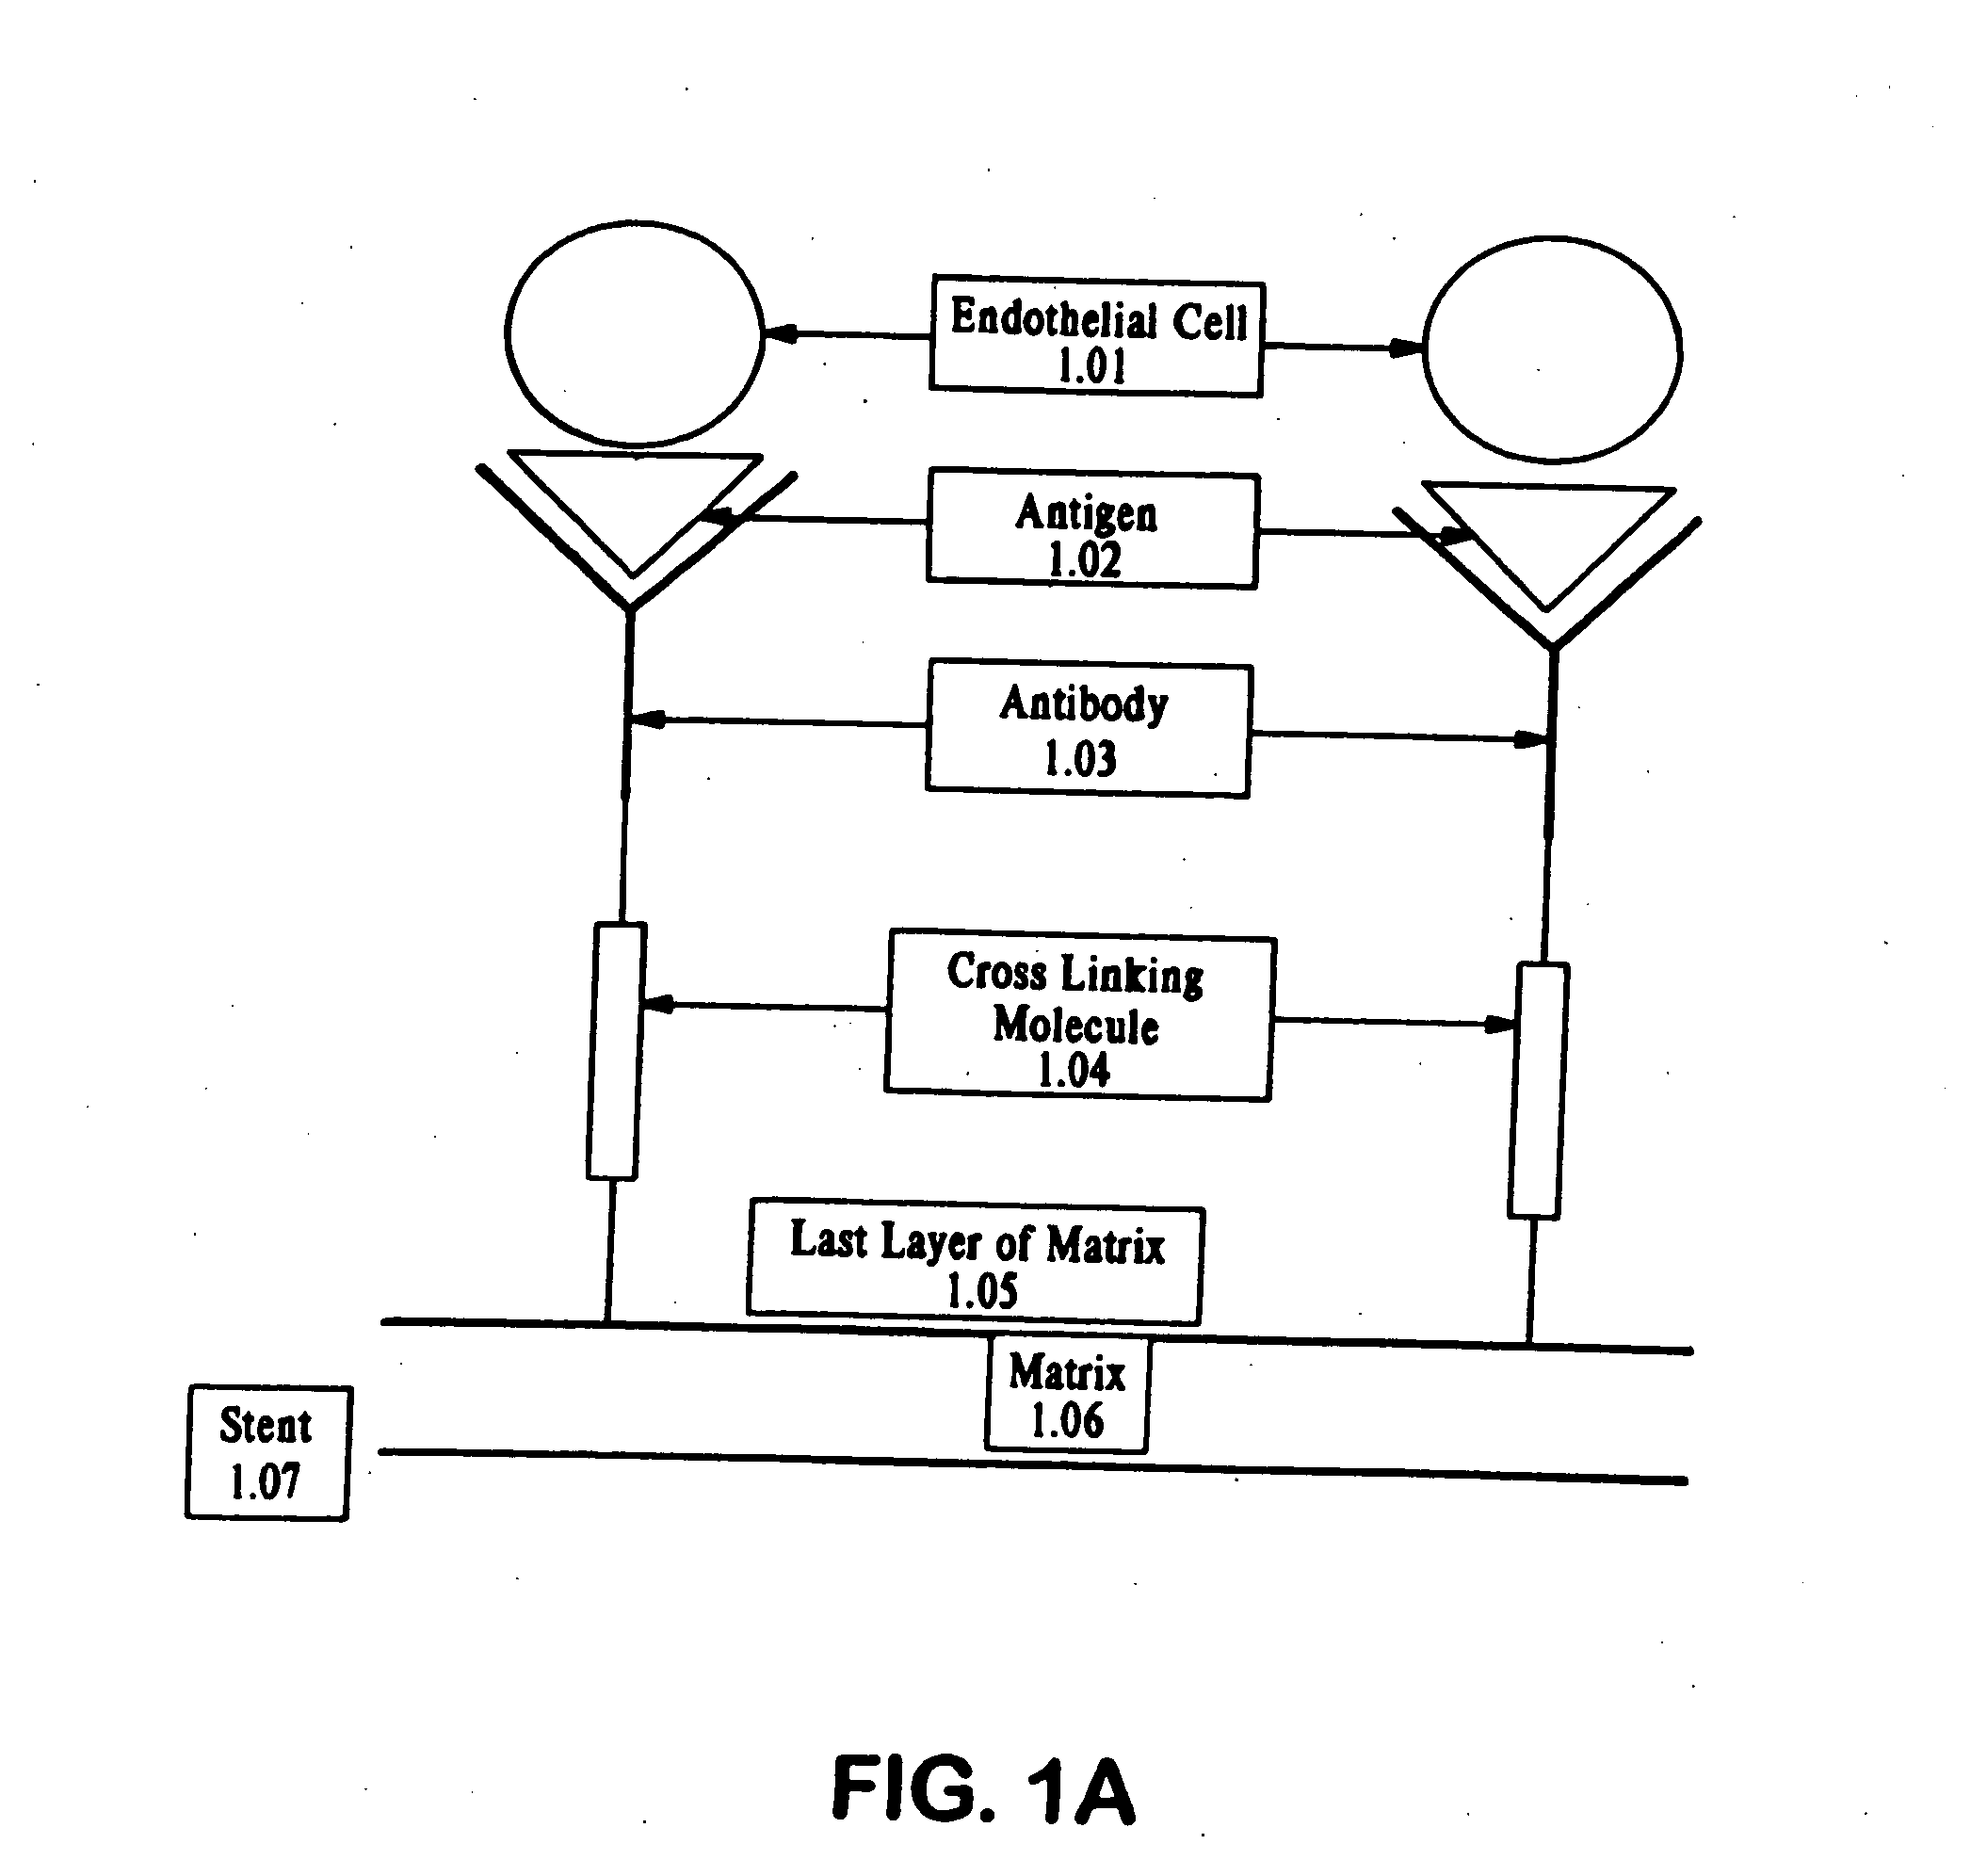 Medical device with coating that promotes endothelial cell adherence and differentiation